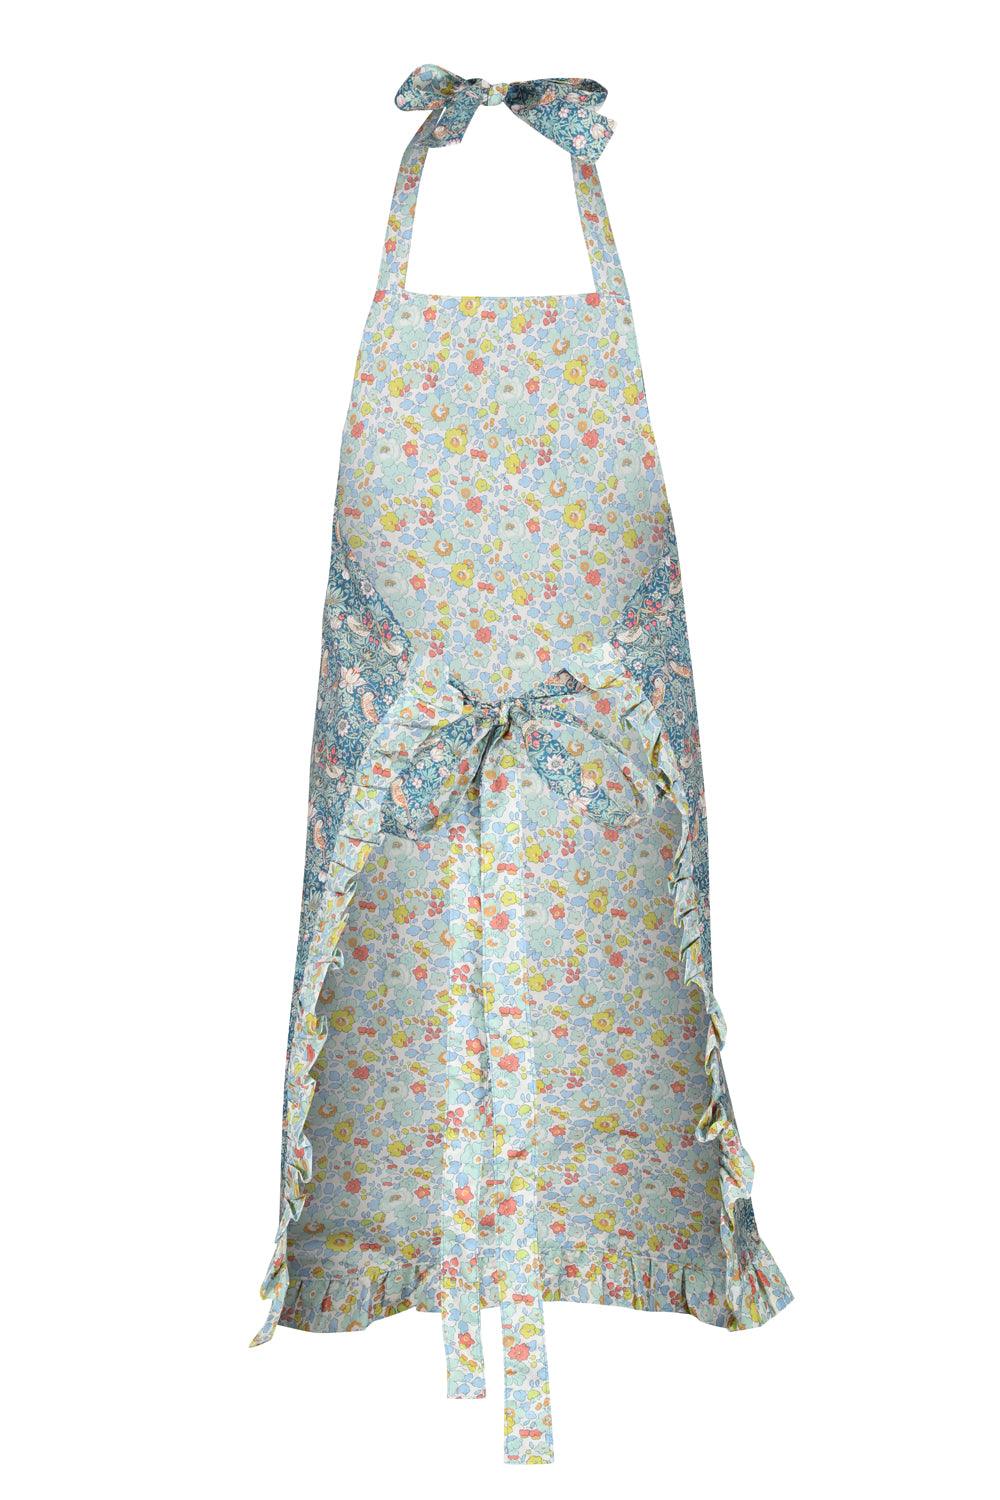 Reversible Ruffle Apron STRAWBERRY THIEF & BETSY SAGE - Coco & Wolf